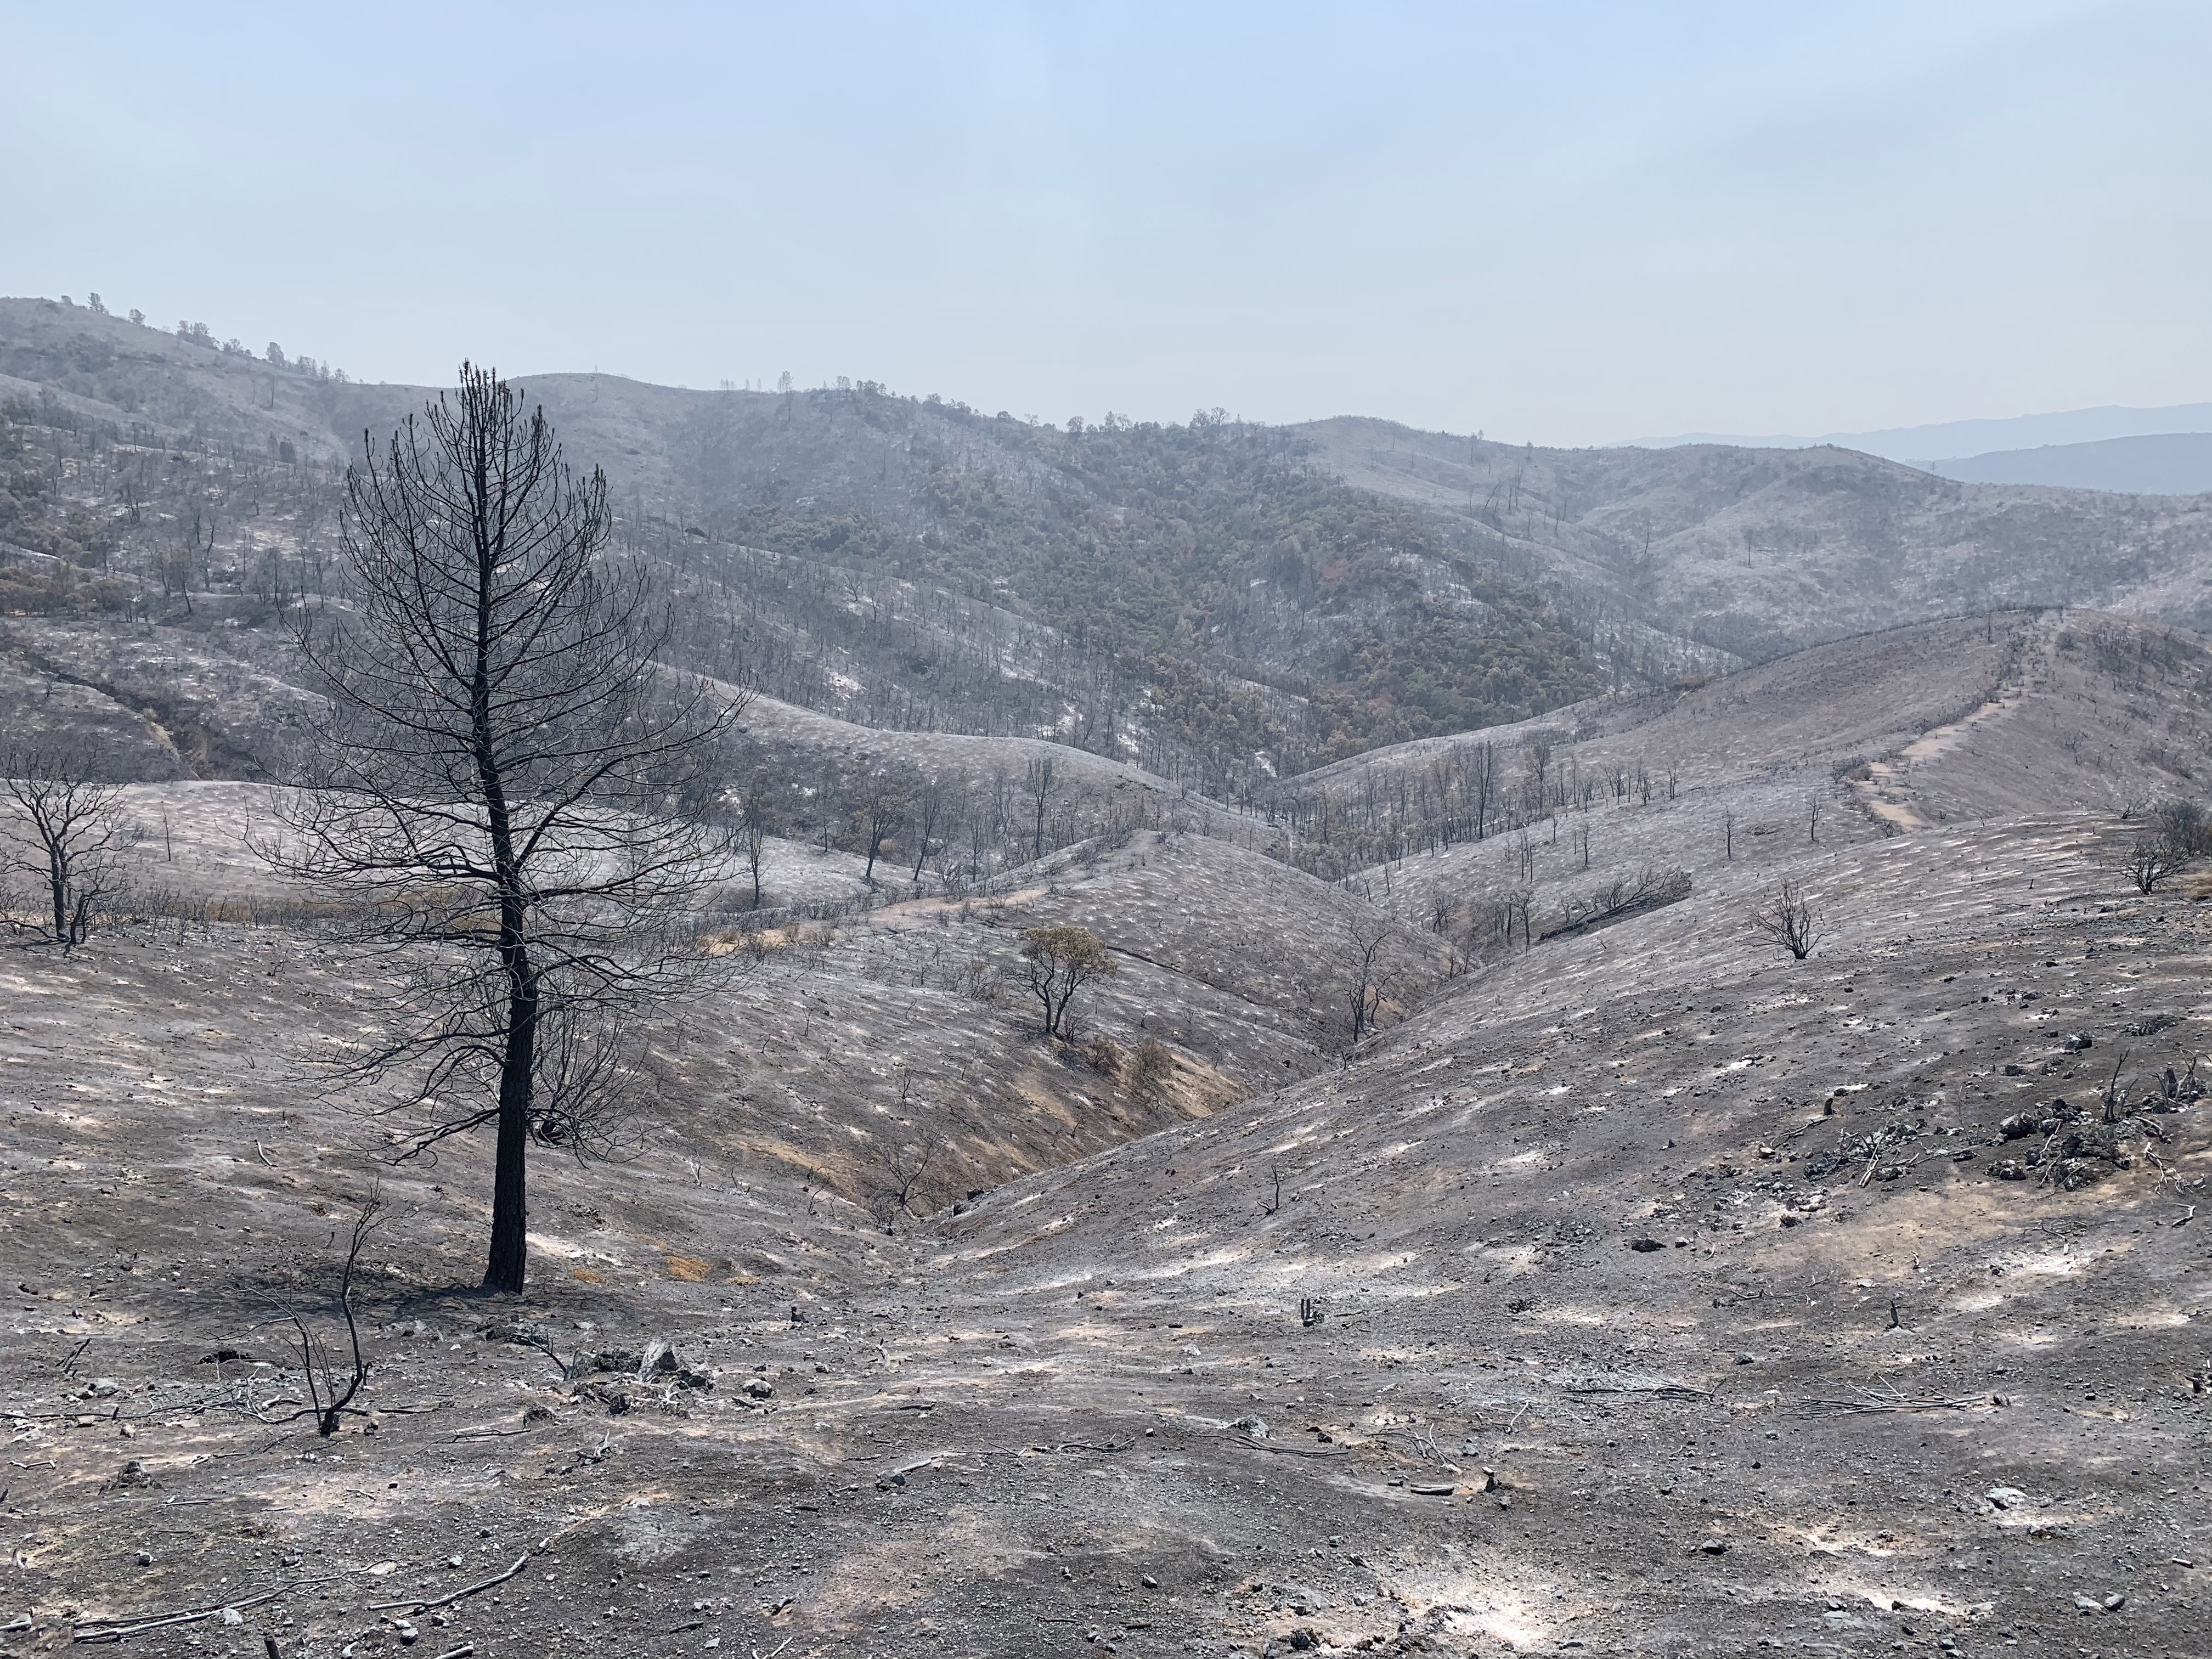 Blackened skeletons of trees and shrubs stand watch over miles of burned hills.